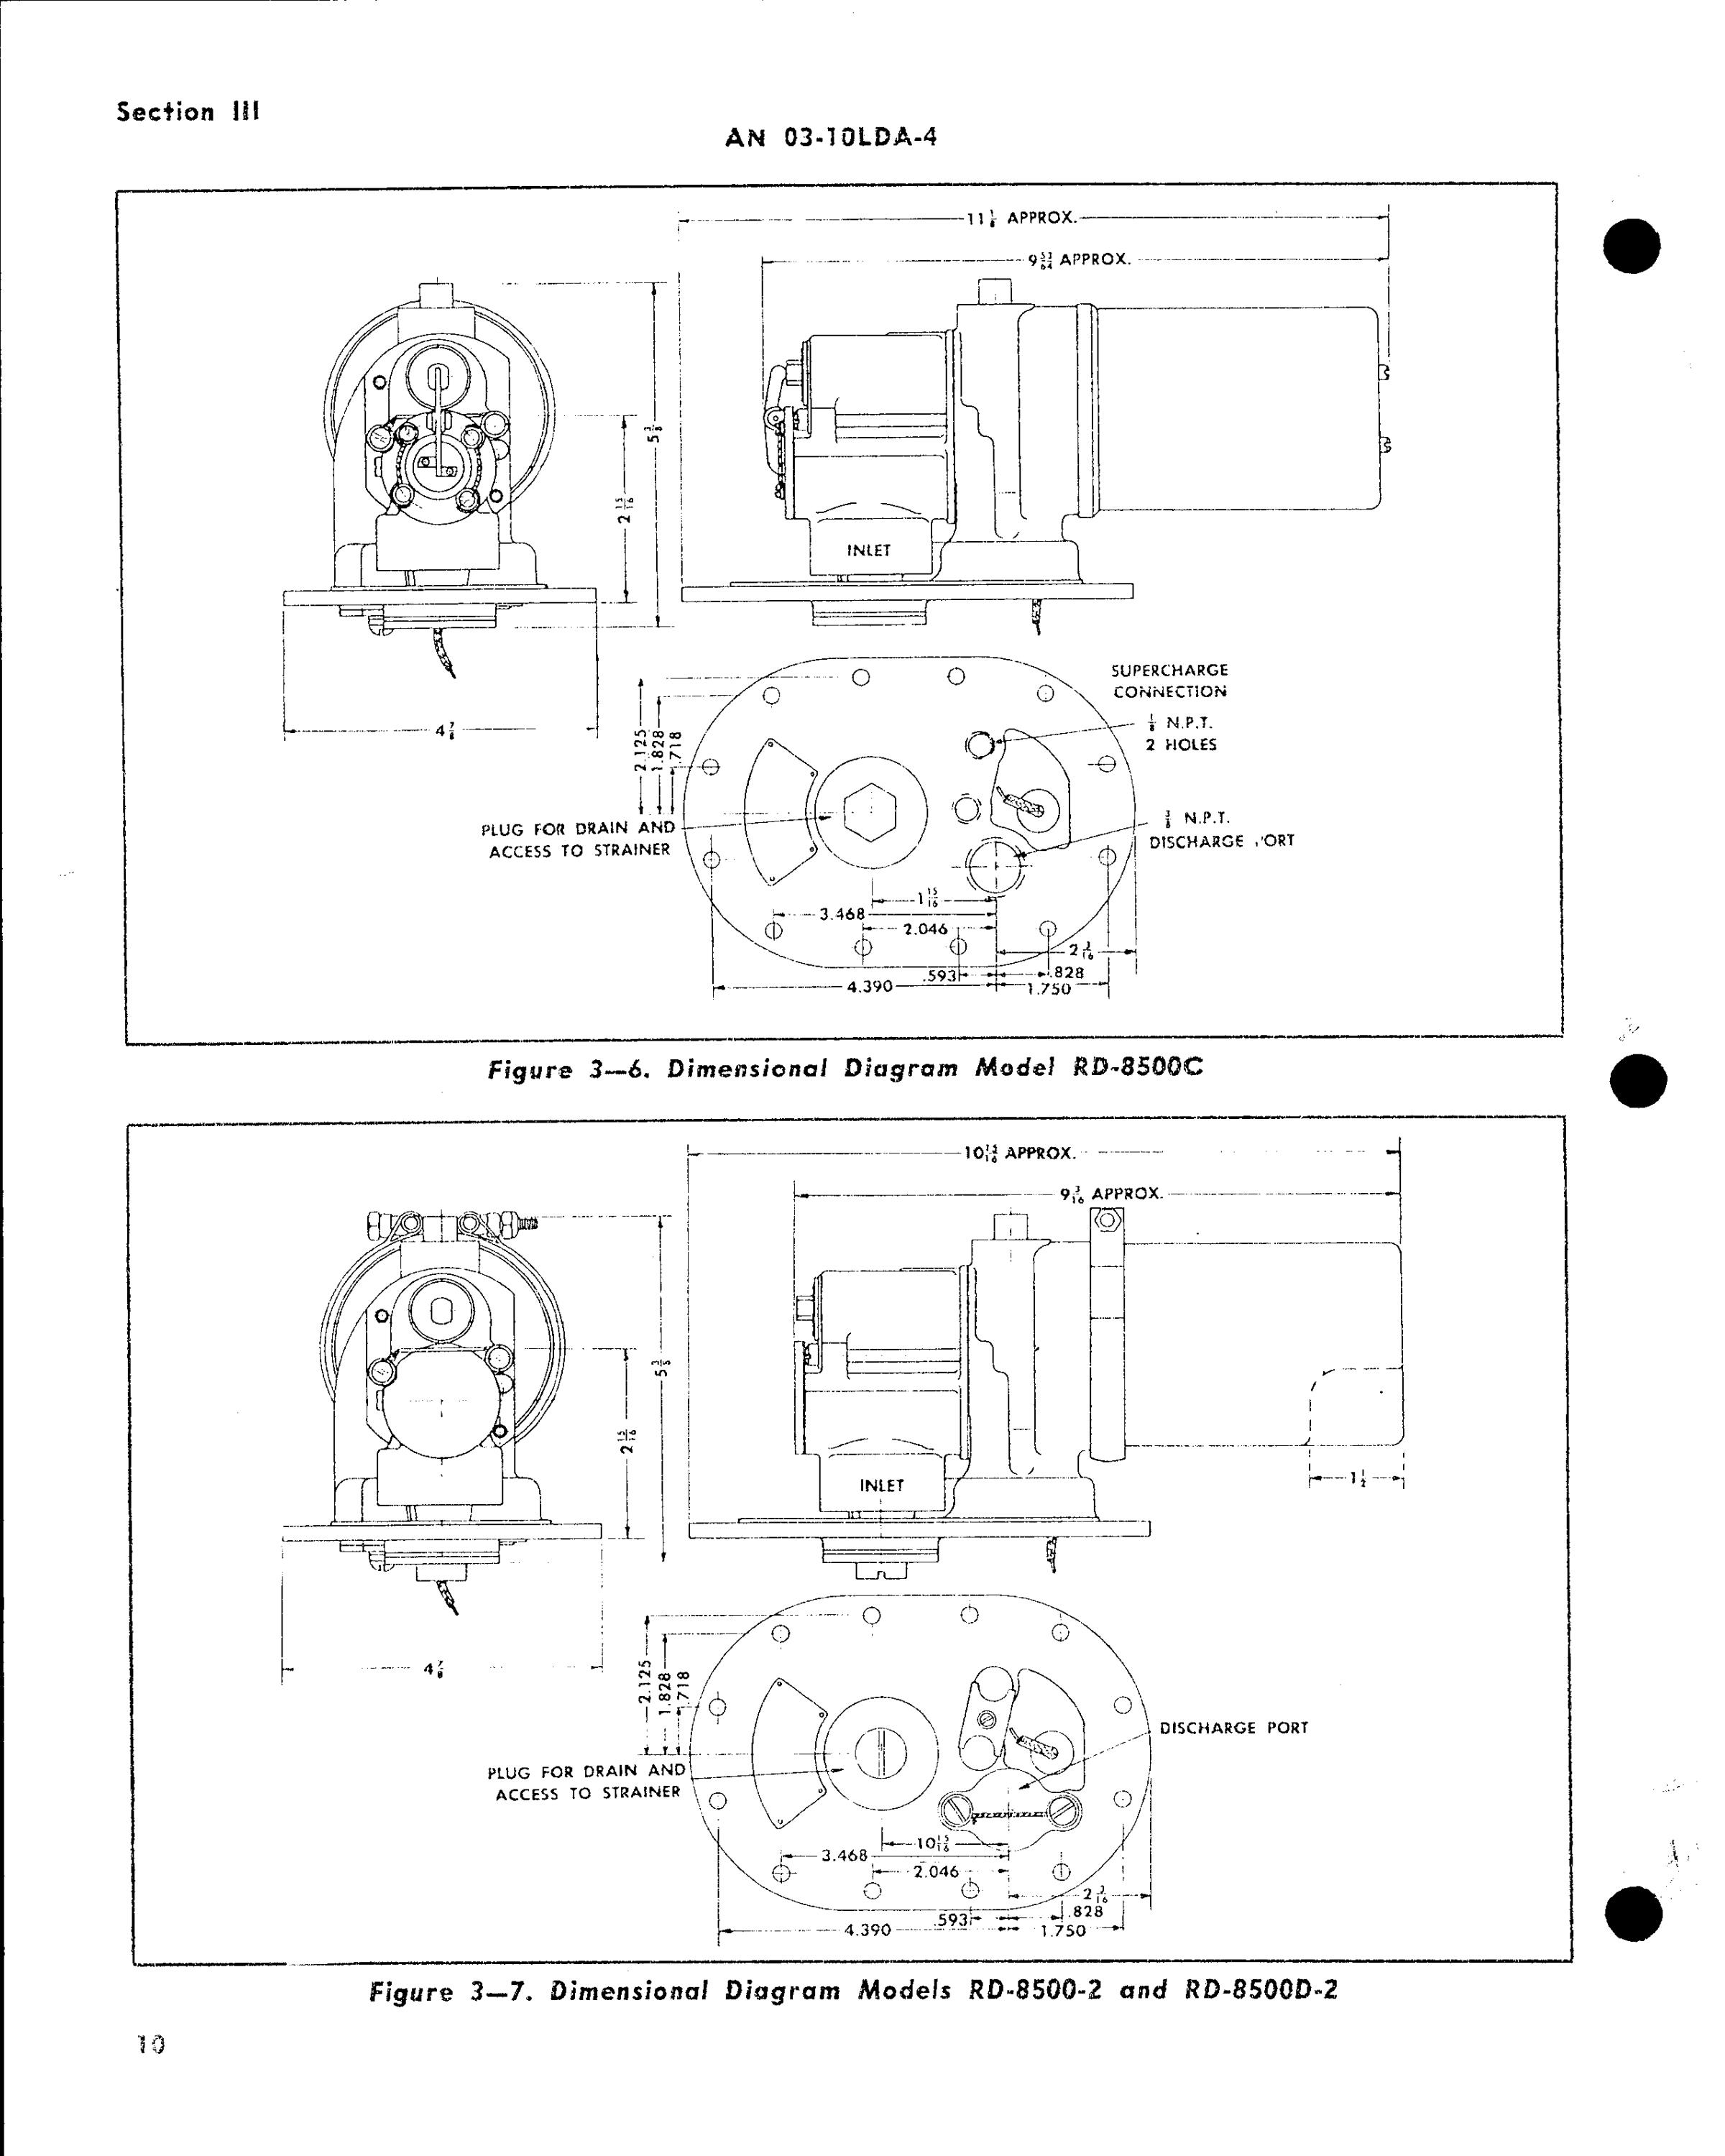 Sample page 8 from AirCorps Library document: Operation & Service Instruct. for Water Injection Units RD-7500 & 8500 (Romec)